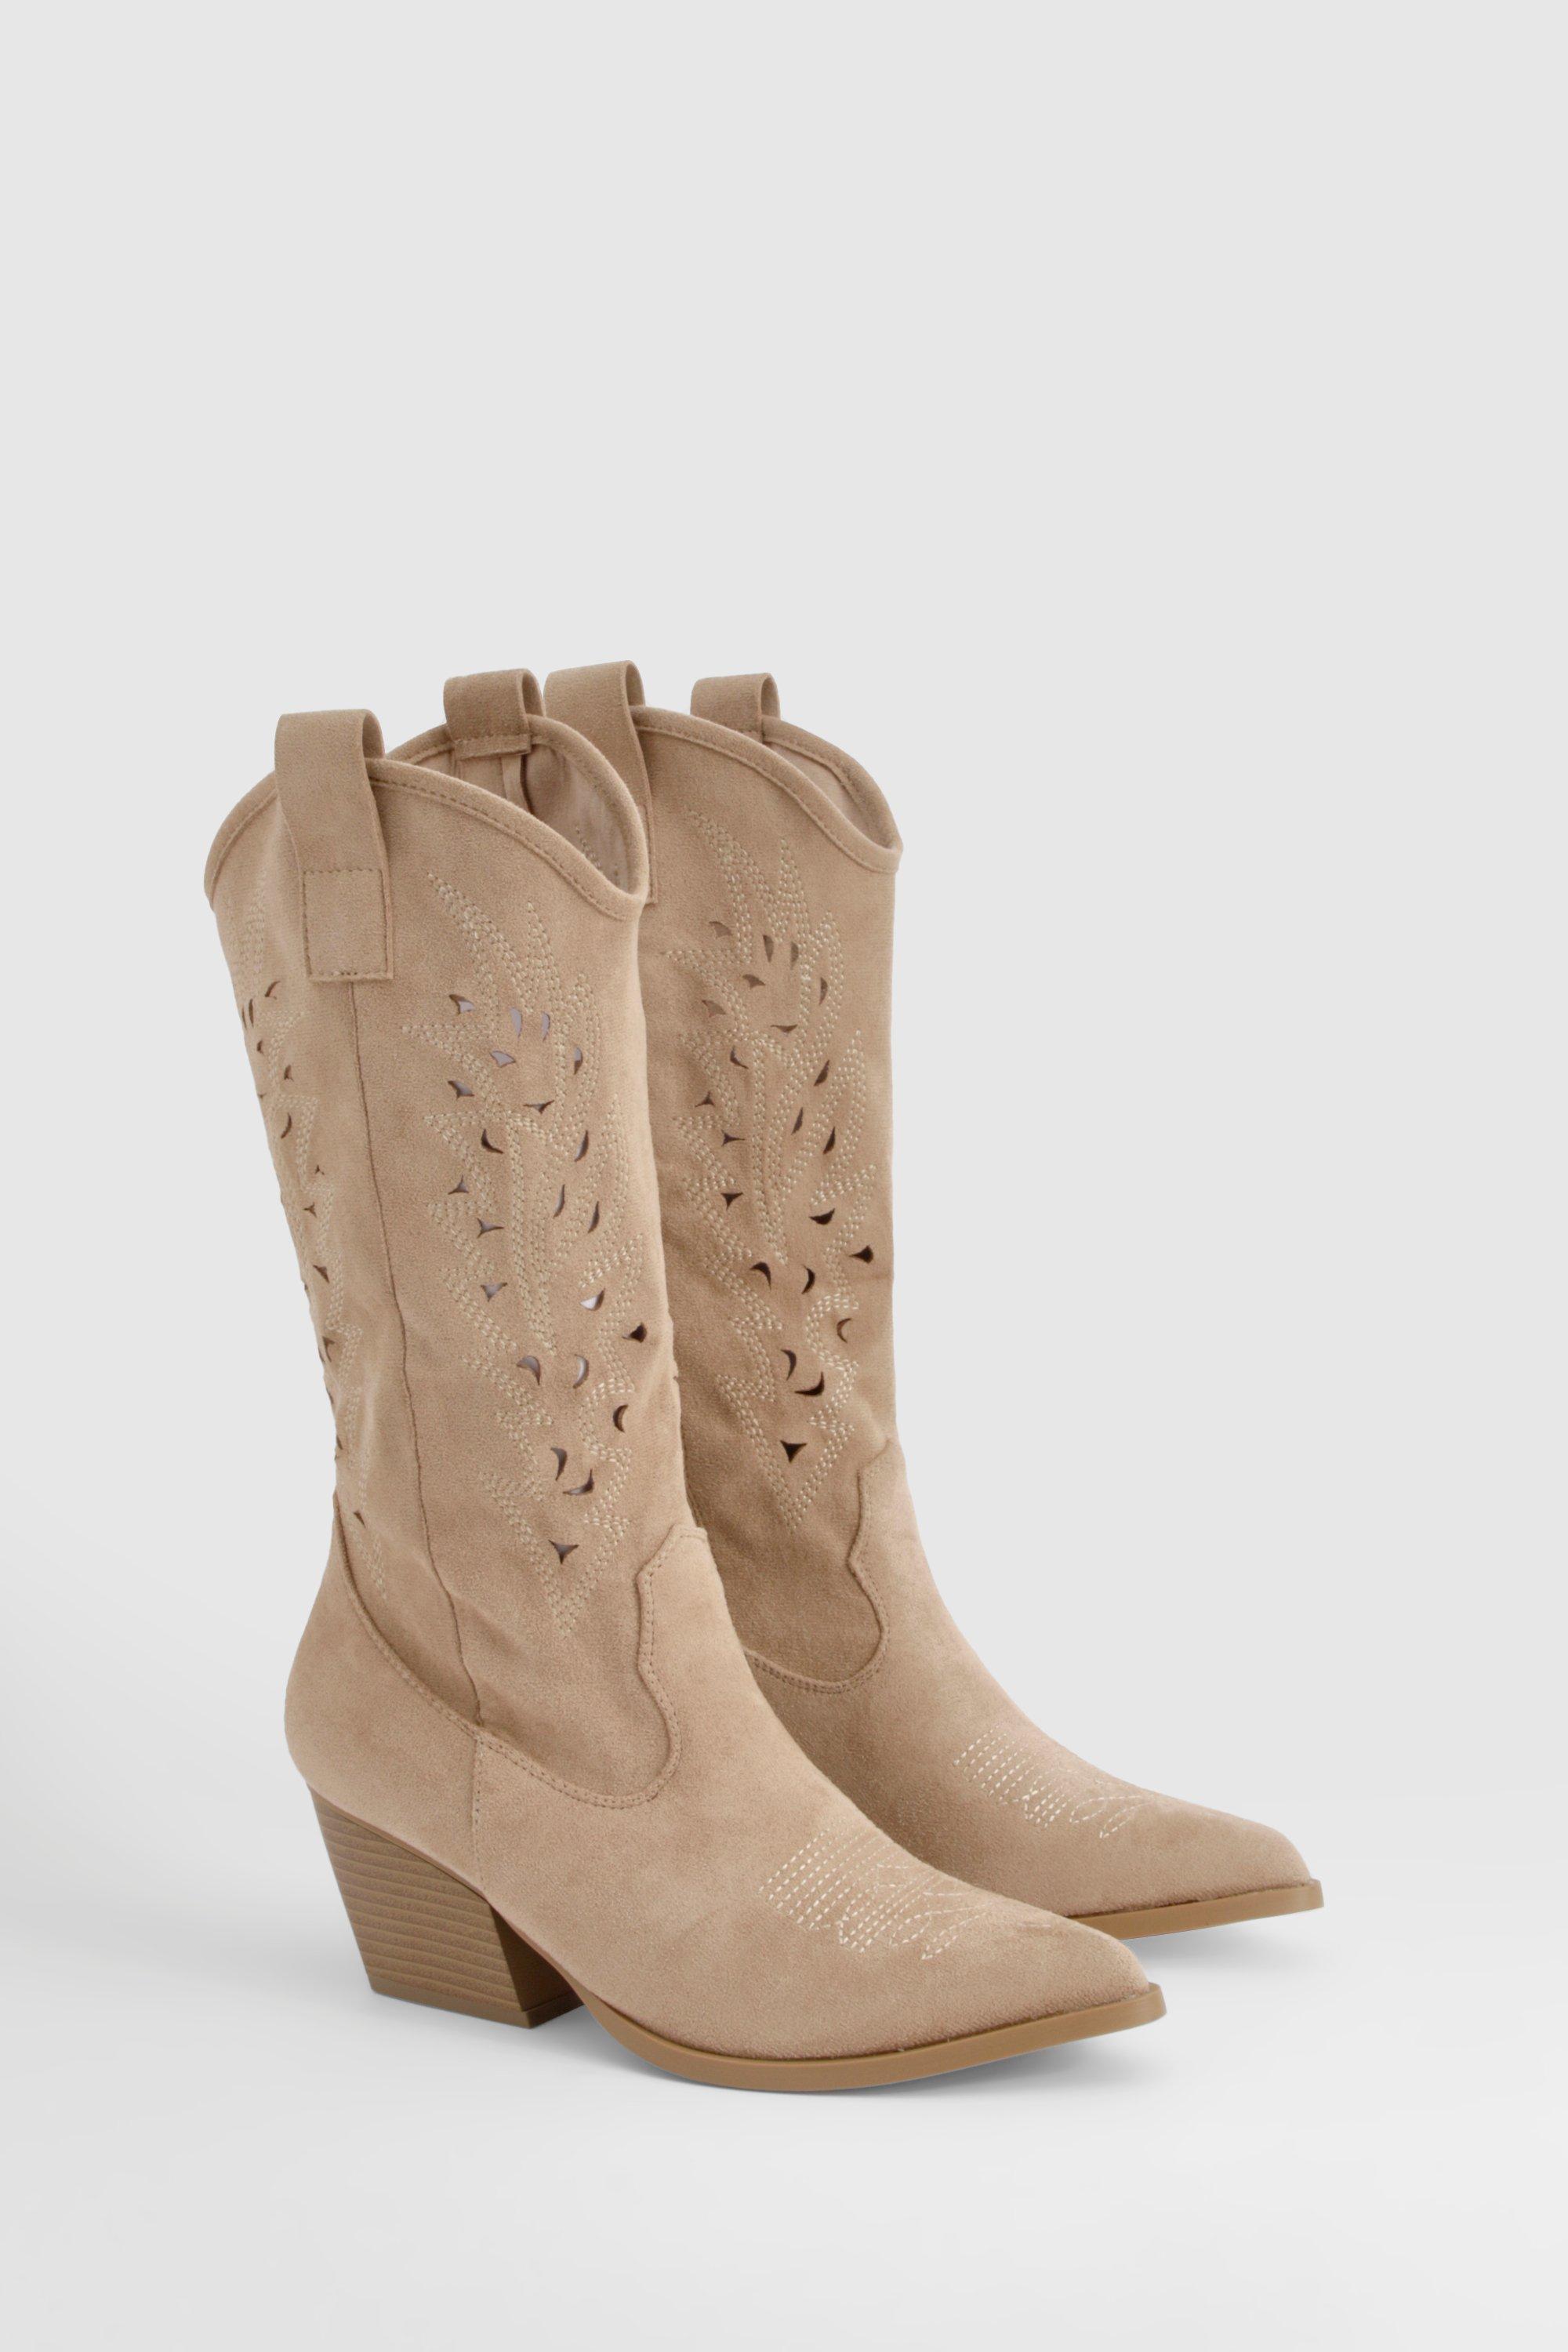 Boohoo Cut Out Detail Knee High Western Boots, Sand